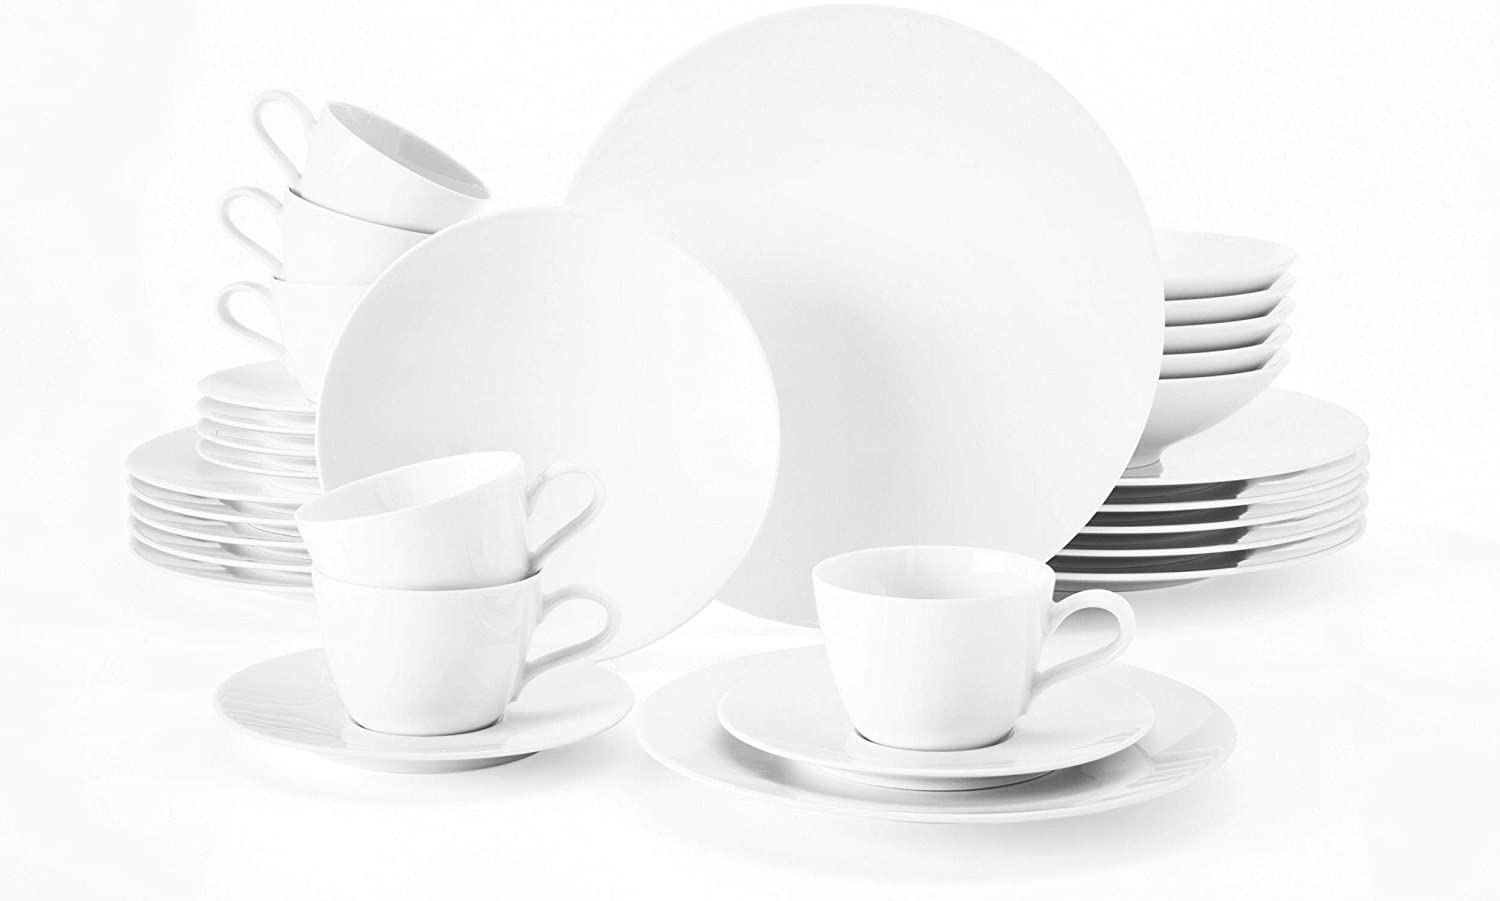 Seltmann Weiden 001.737480 White Crockery Set 30 Pieces | Life Series Set includes 6 Dinner Plates, Soup Plates, Breakfast Plates, Coffee Cups and Saucers, Hard Porcelain